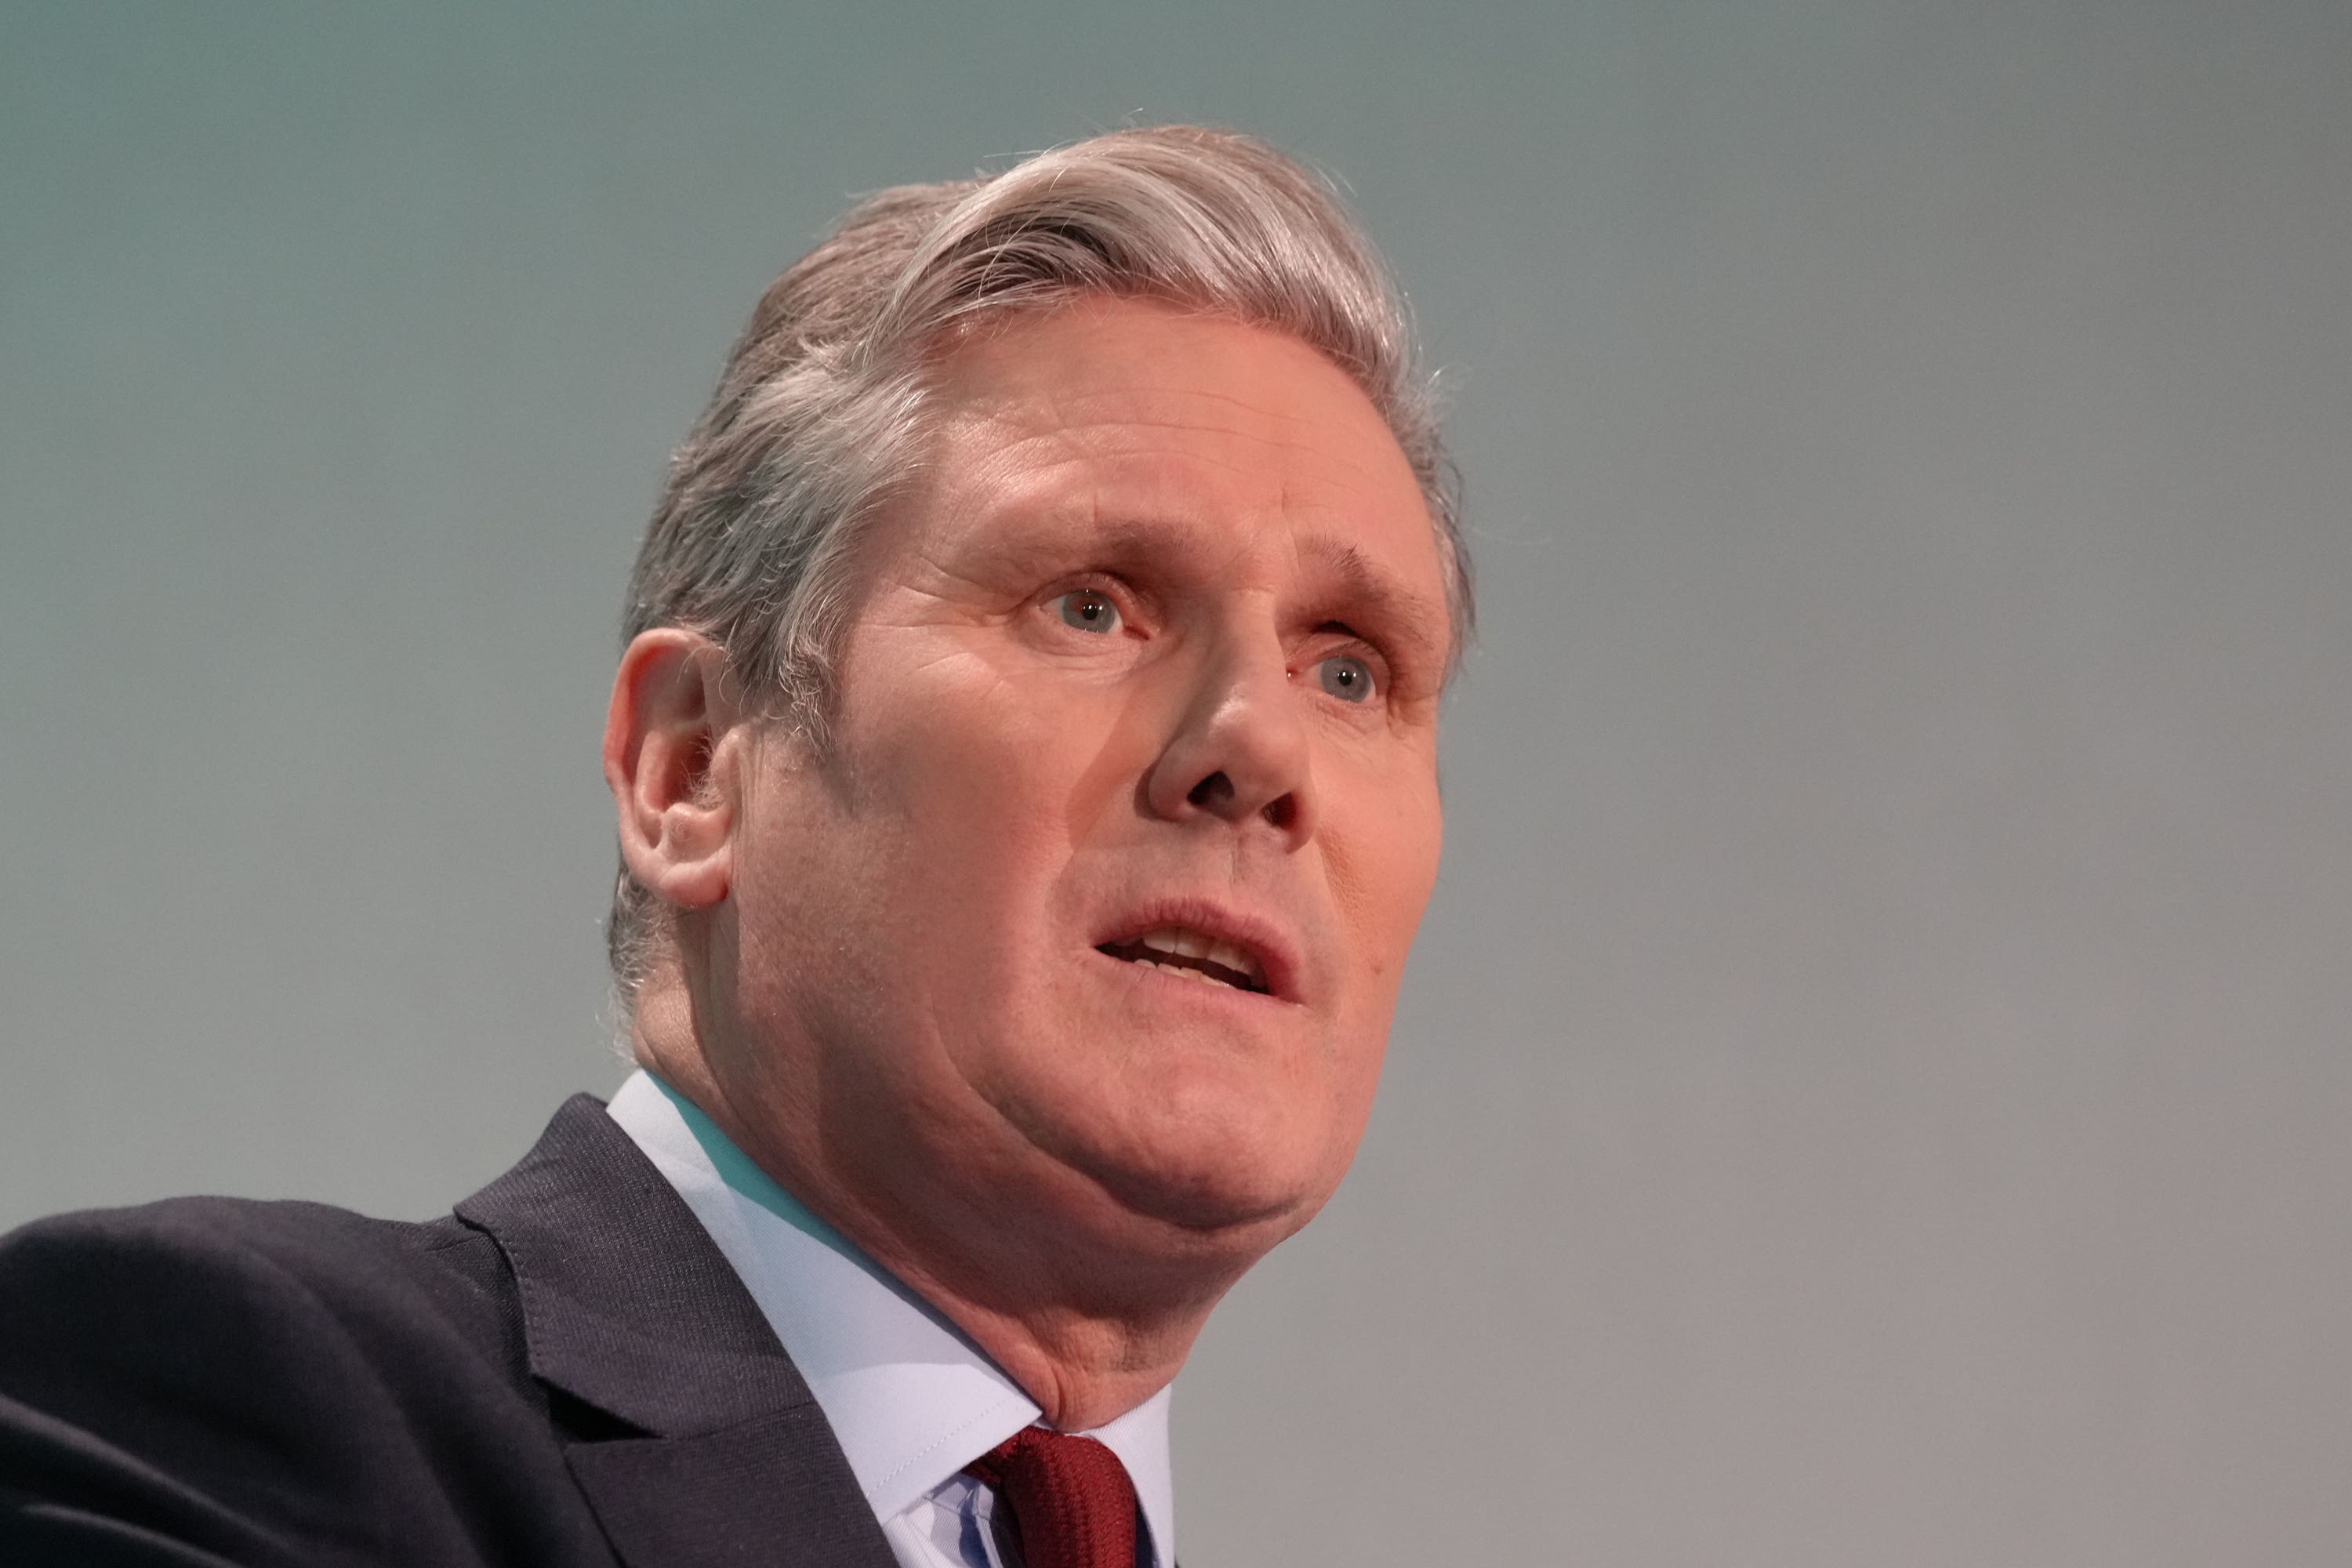 Sir Keir Starmer is hoping to win power after Labour faced its worst defeat since 1935 under his predecessor (Maja Smiejkowska/PA)